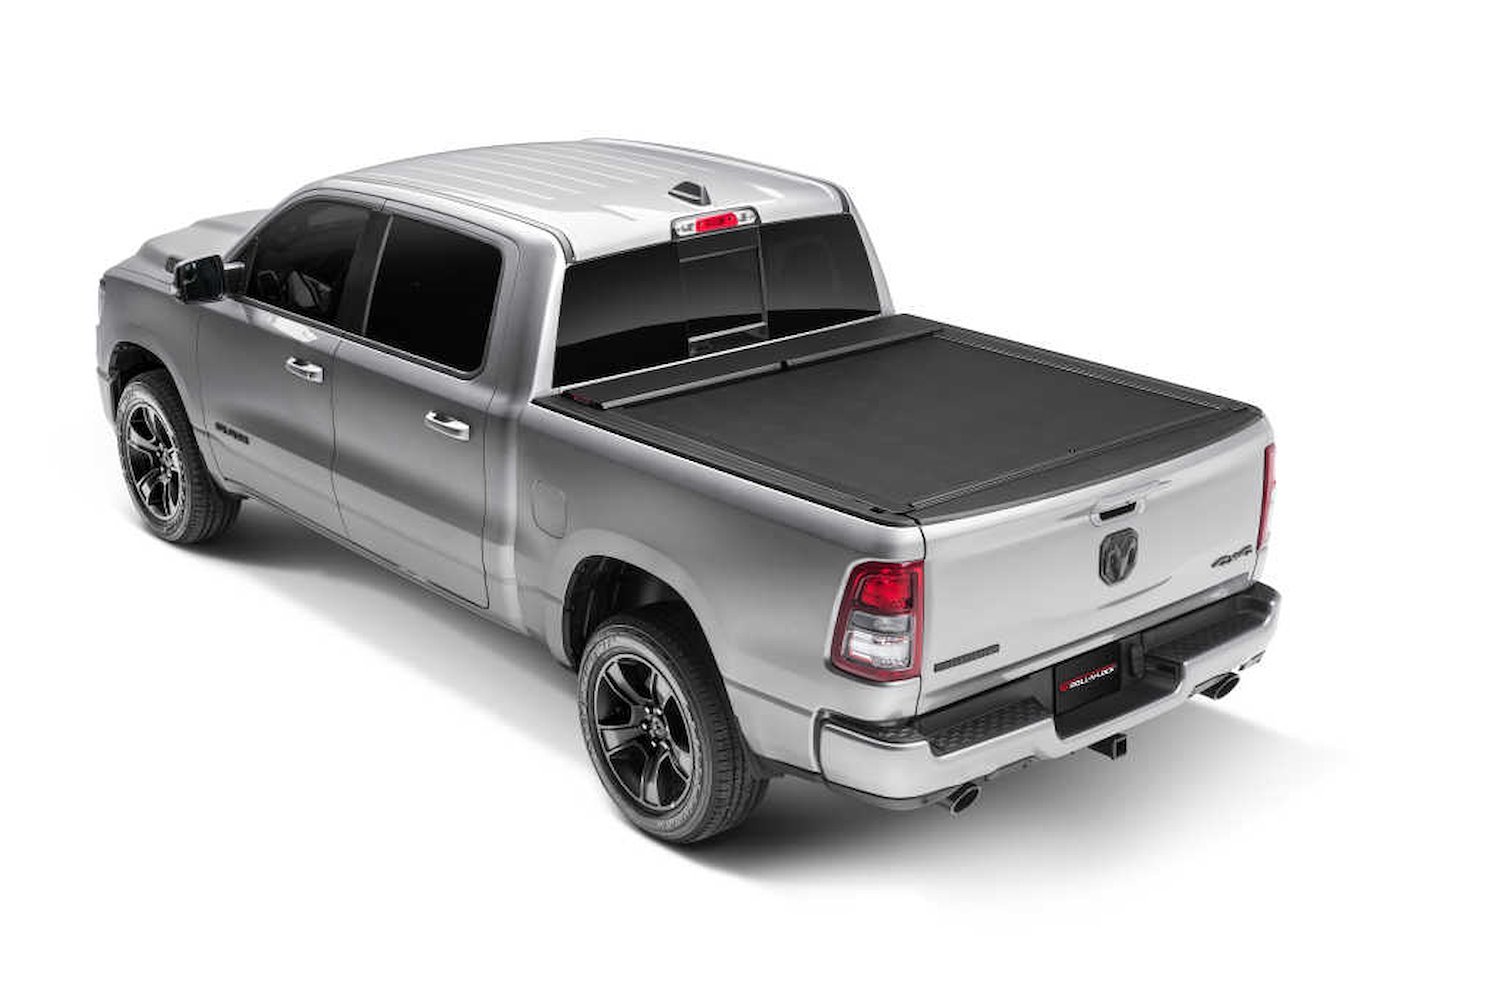 LG402M M-Series Locking Retractable Truck Bed Cover for Select Ram 1500 [6.4 ft. Bed]